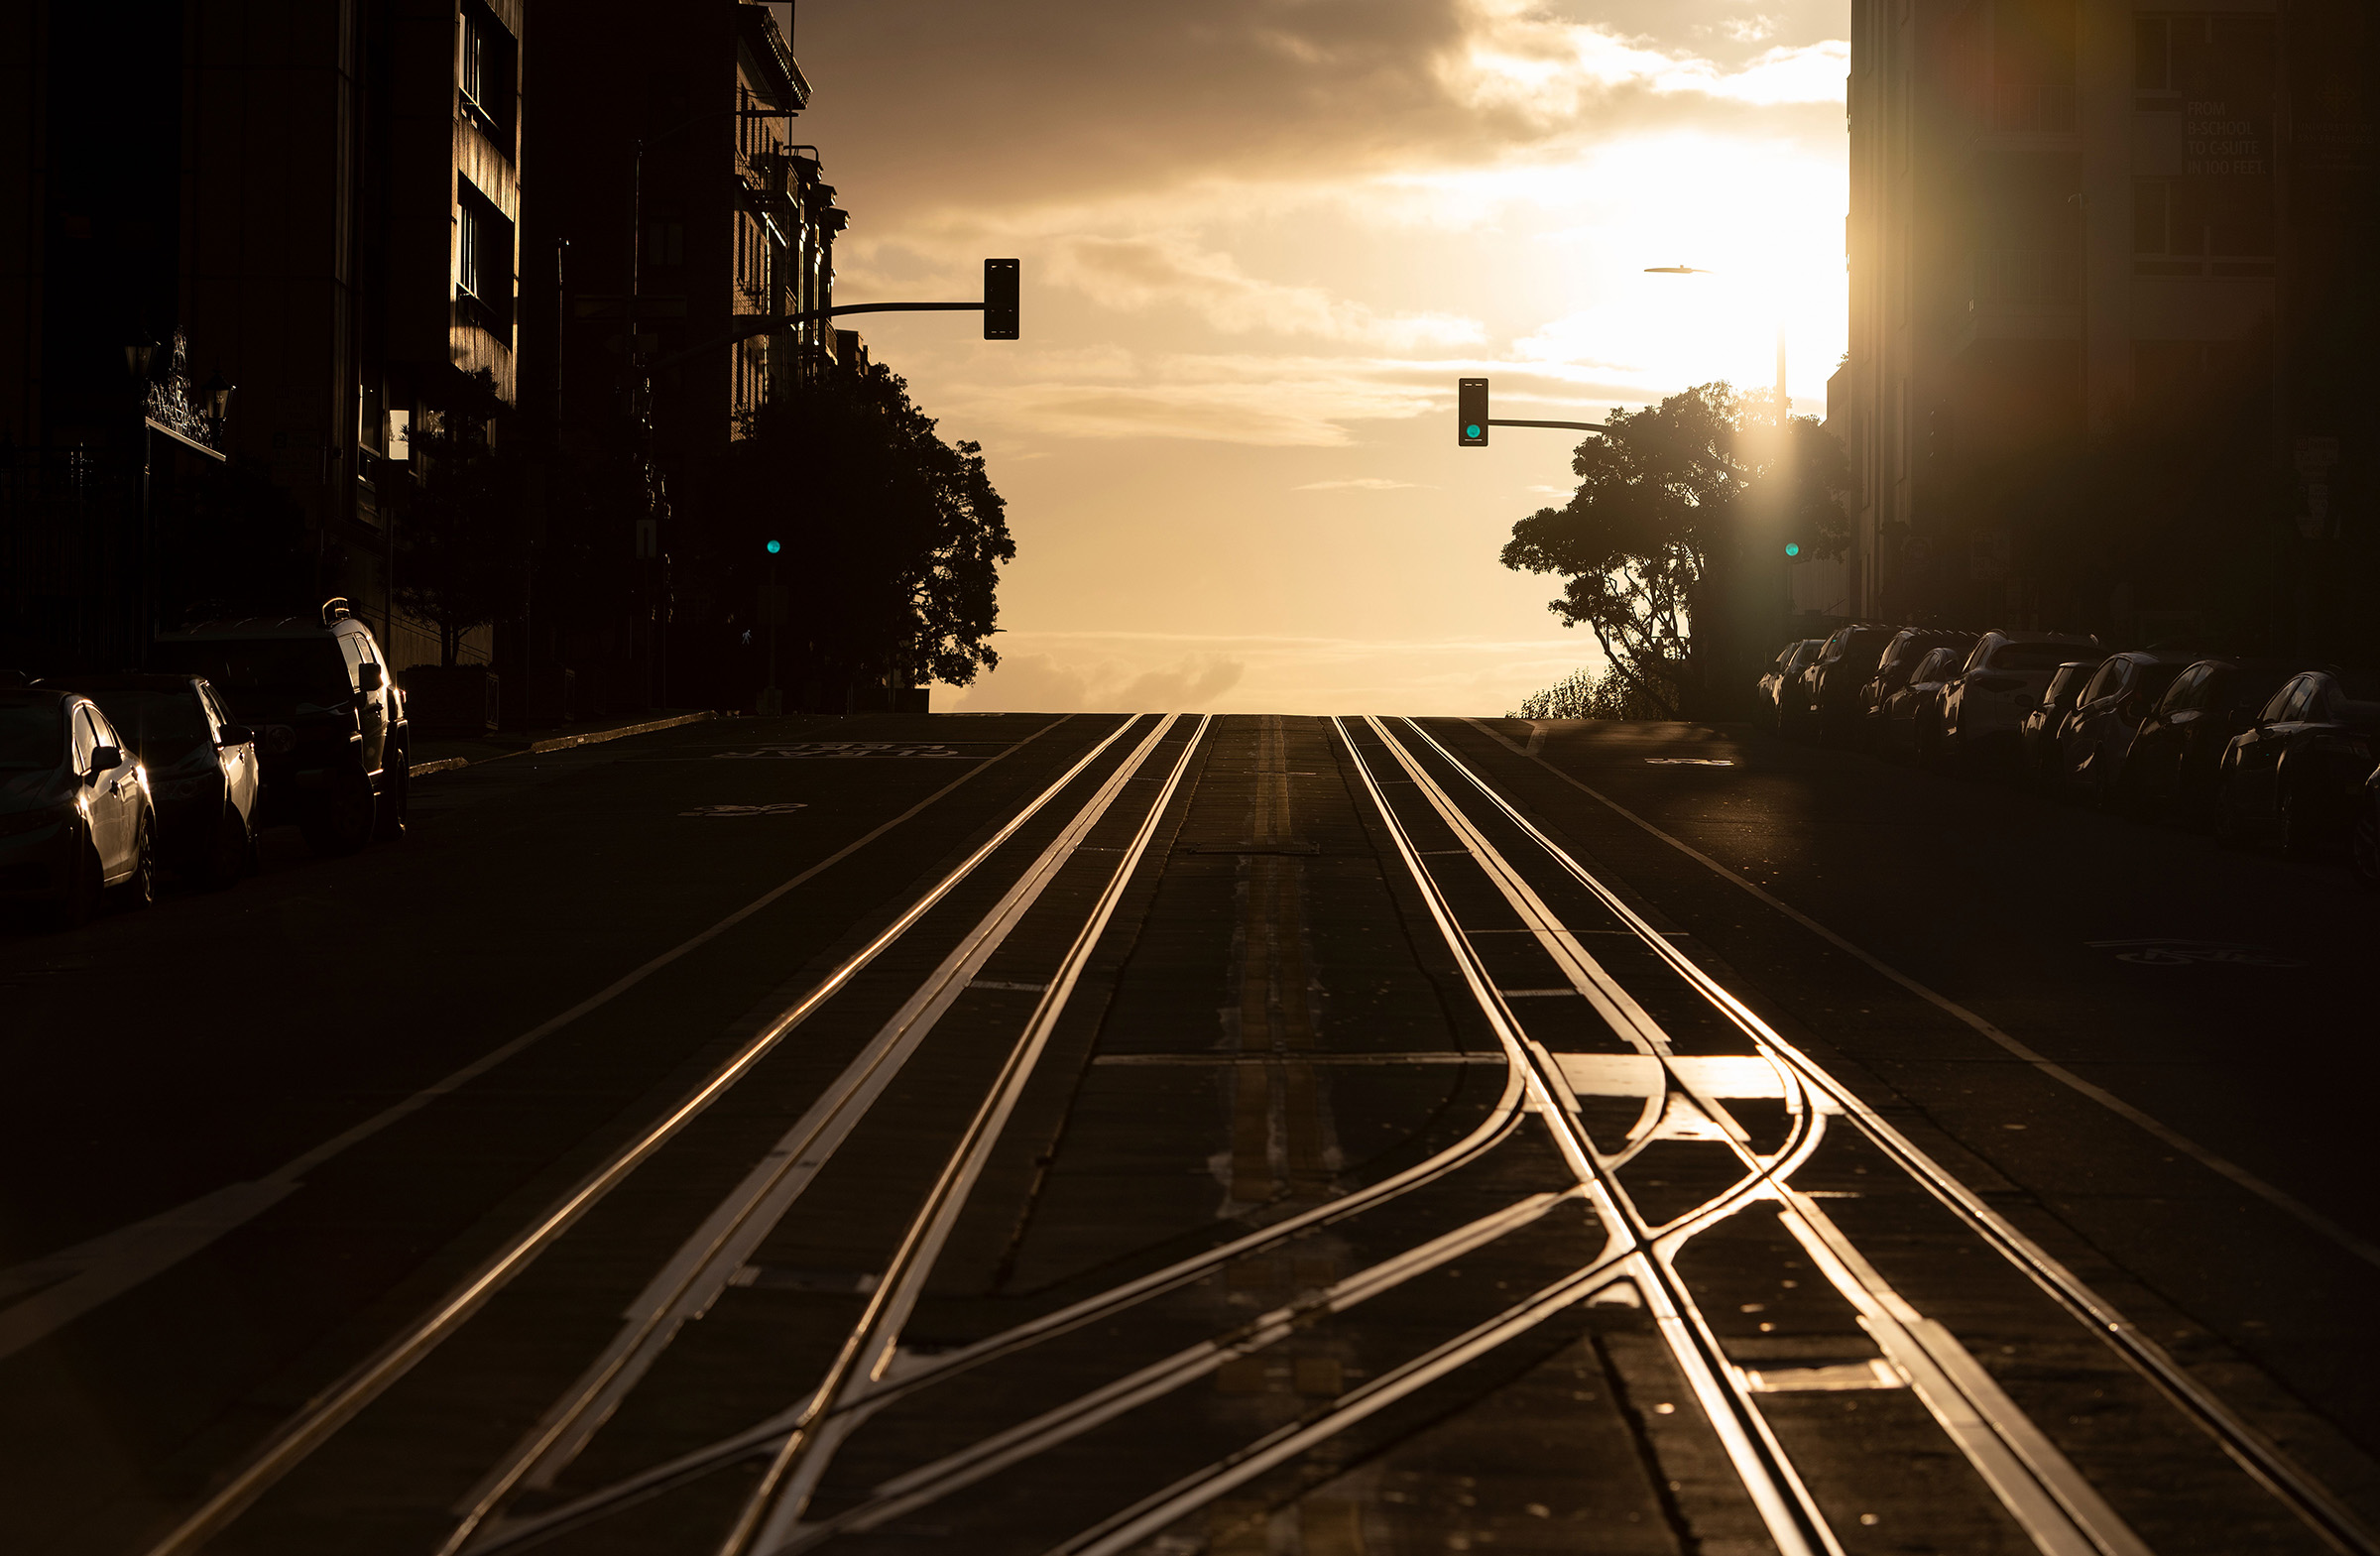 California Street, usually filled with cable cars, is seen empty in San Francisco on March 18, 2020. (Josh Edelson—AFP/Getty Images)